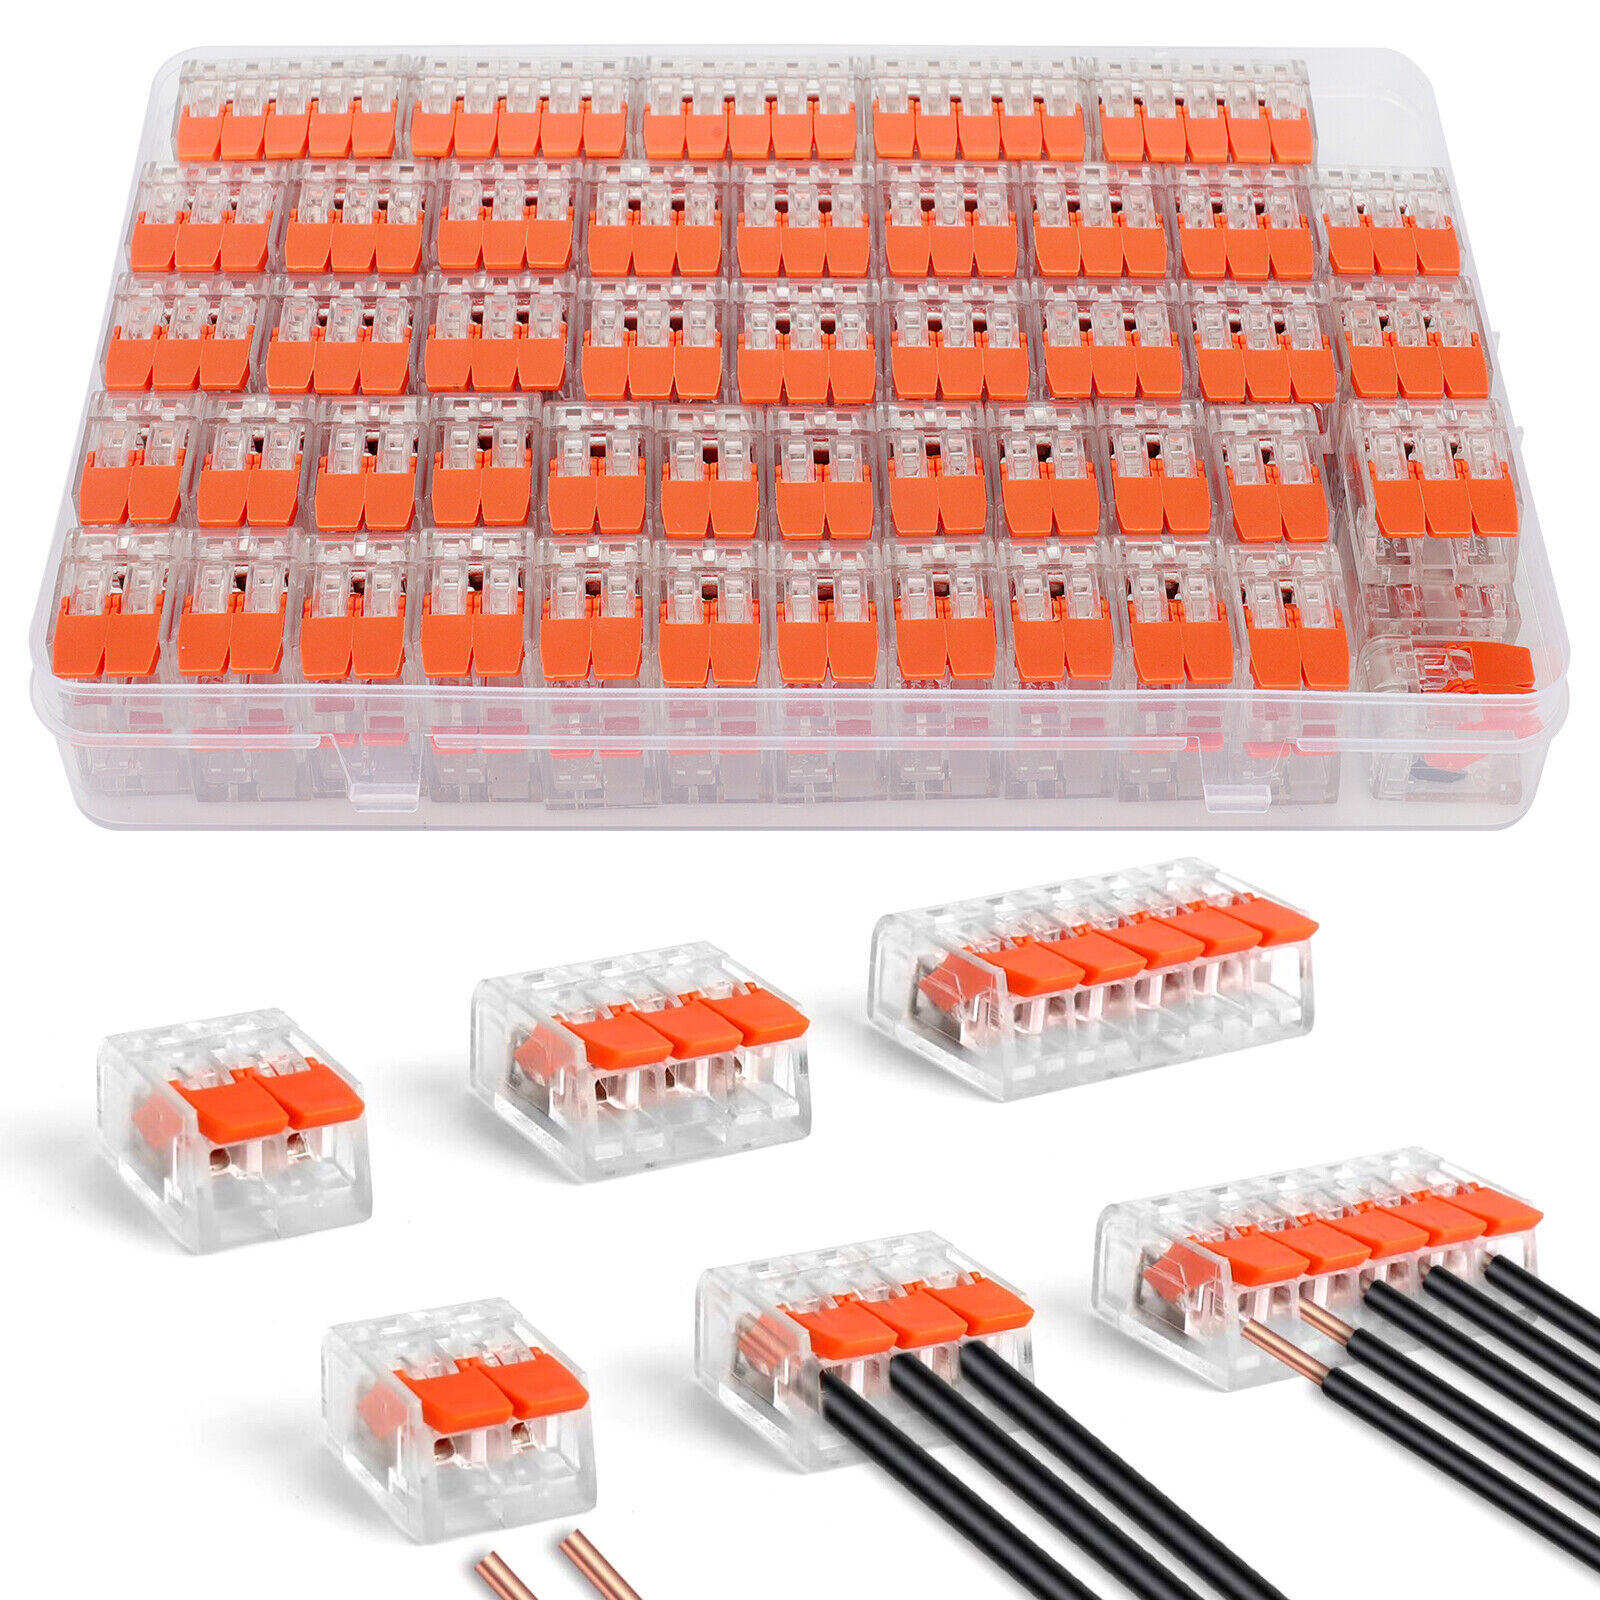 90Pcs 221-412 Lever Nut Compact Splicing Wire Connectors - 2/3/5 Conductor Set